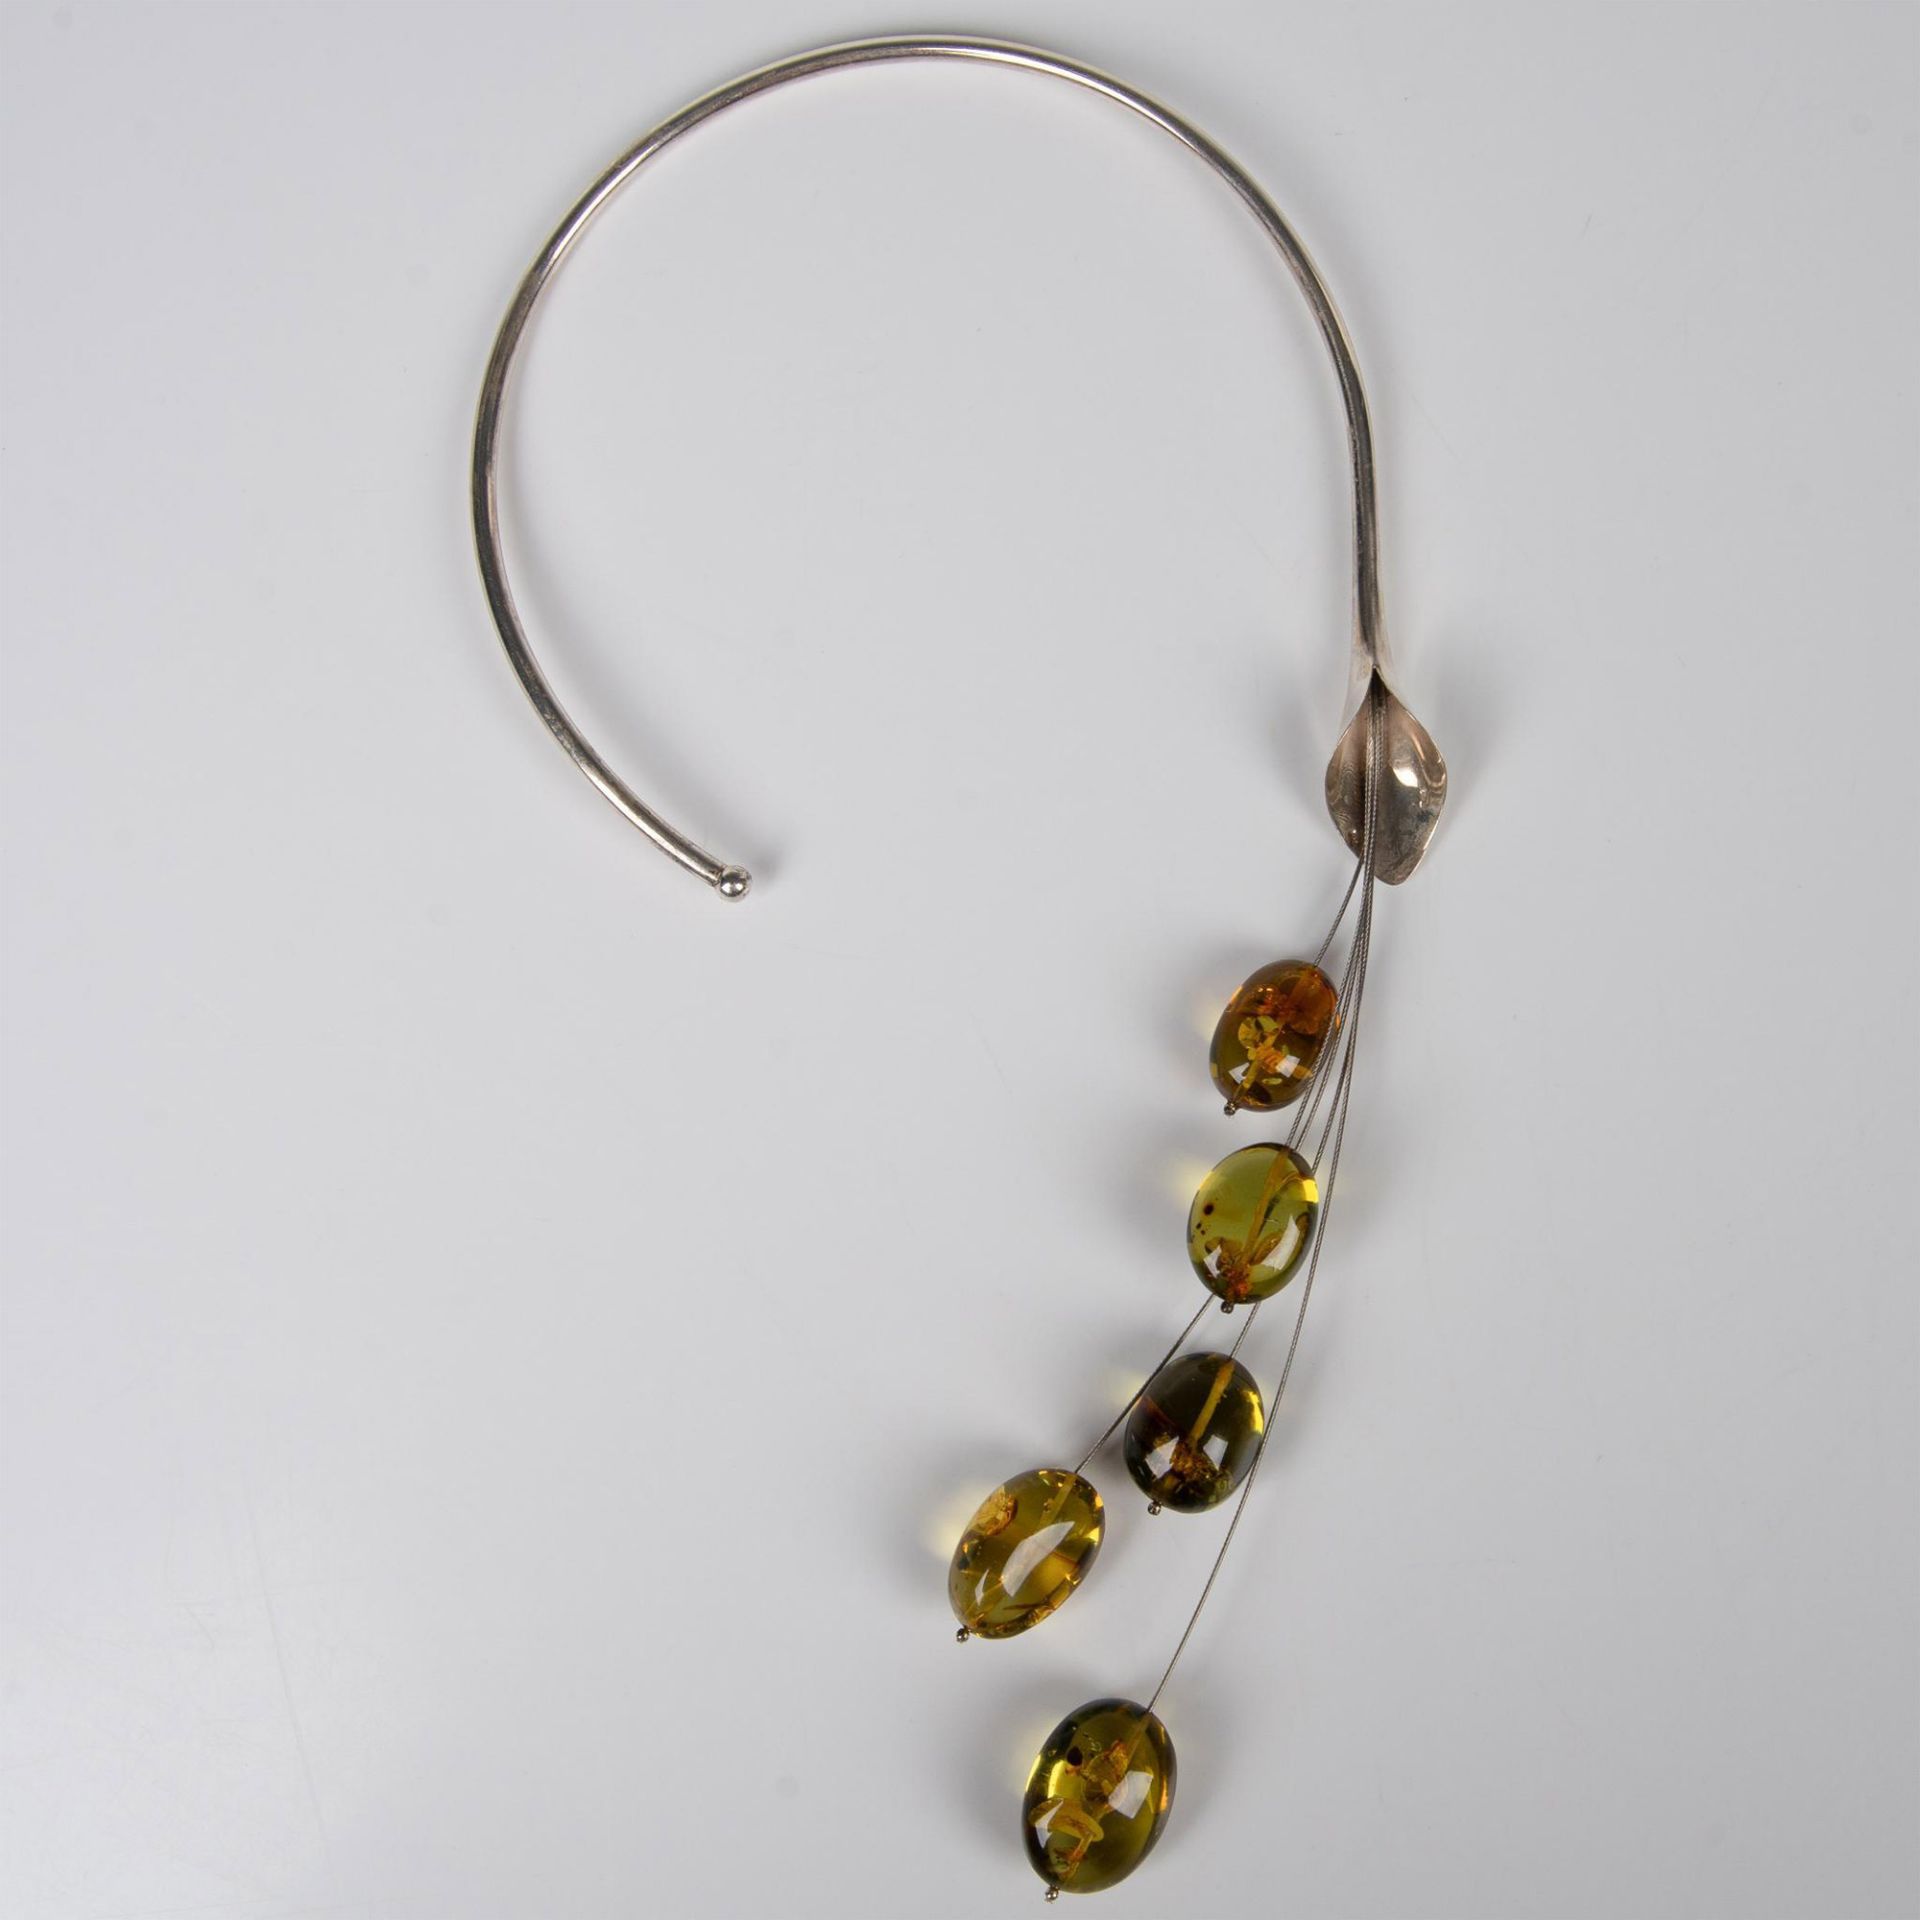 Sterling Silver and Amber Drop Necklace - Image 3 of 4